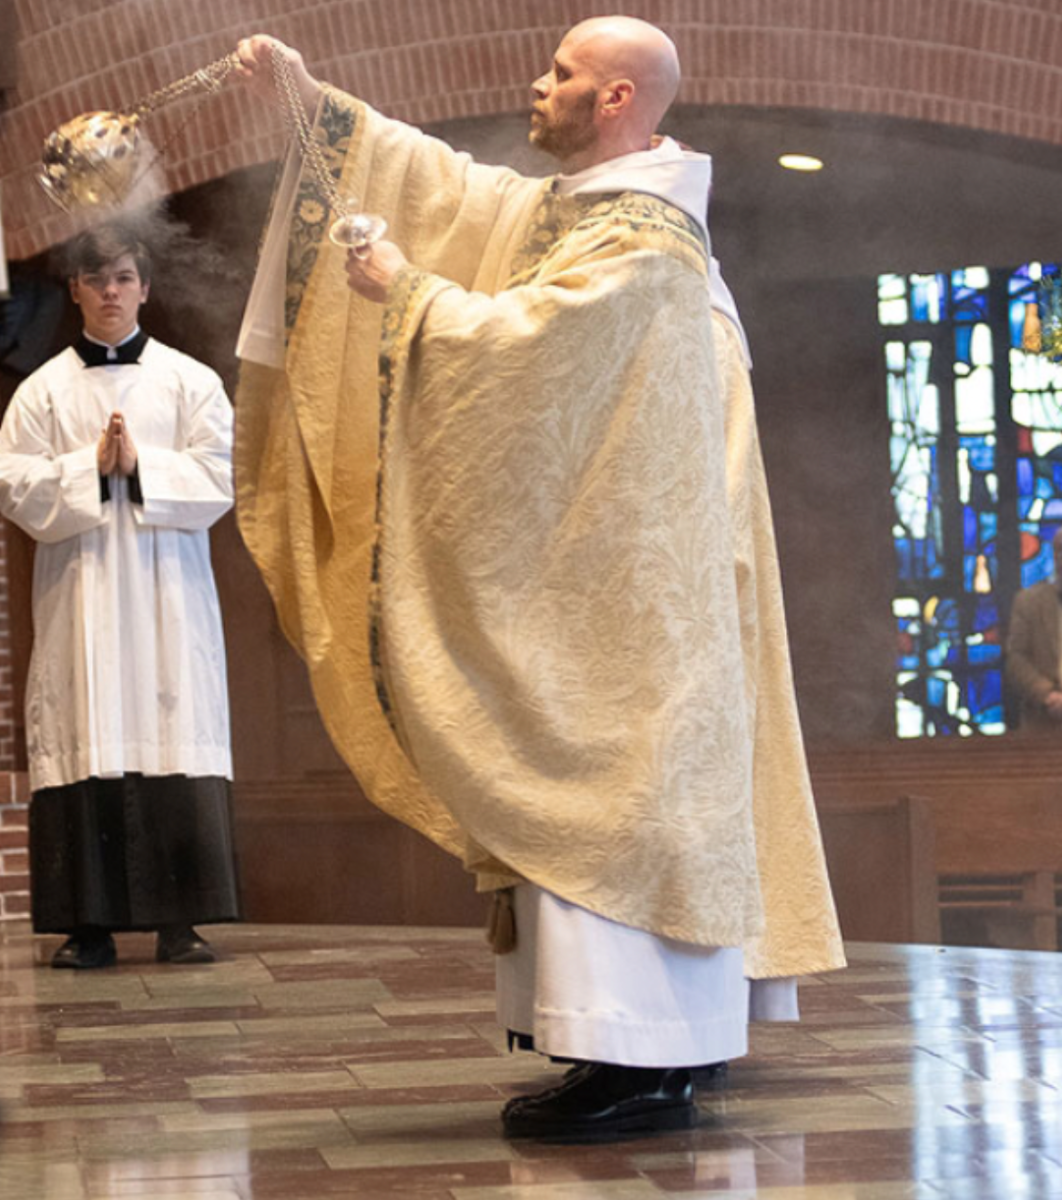 Fr. George, O.S.B during his ordination